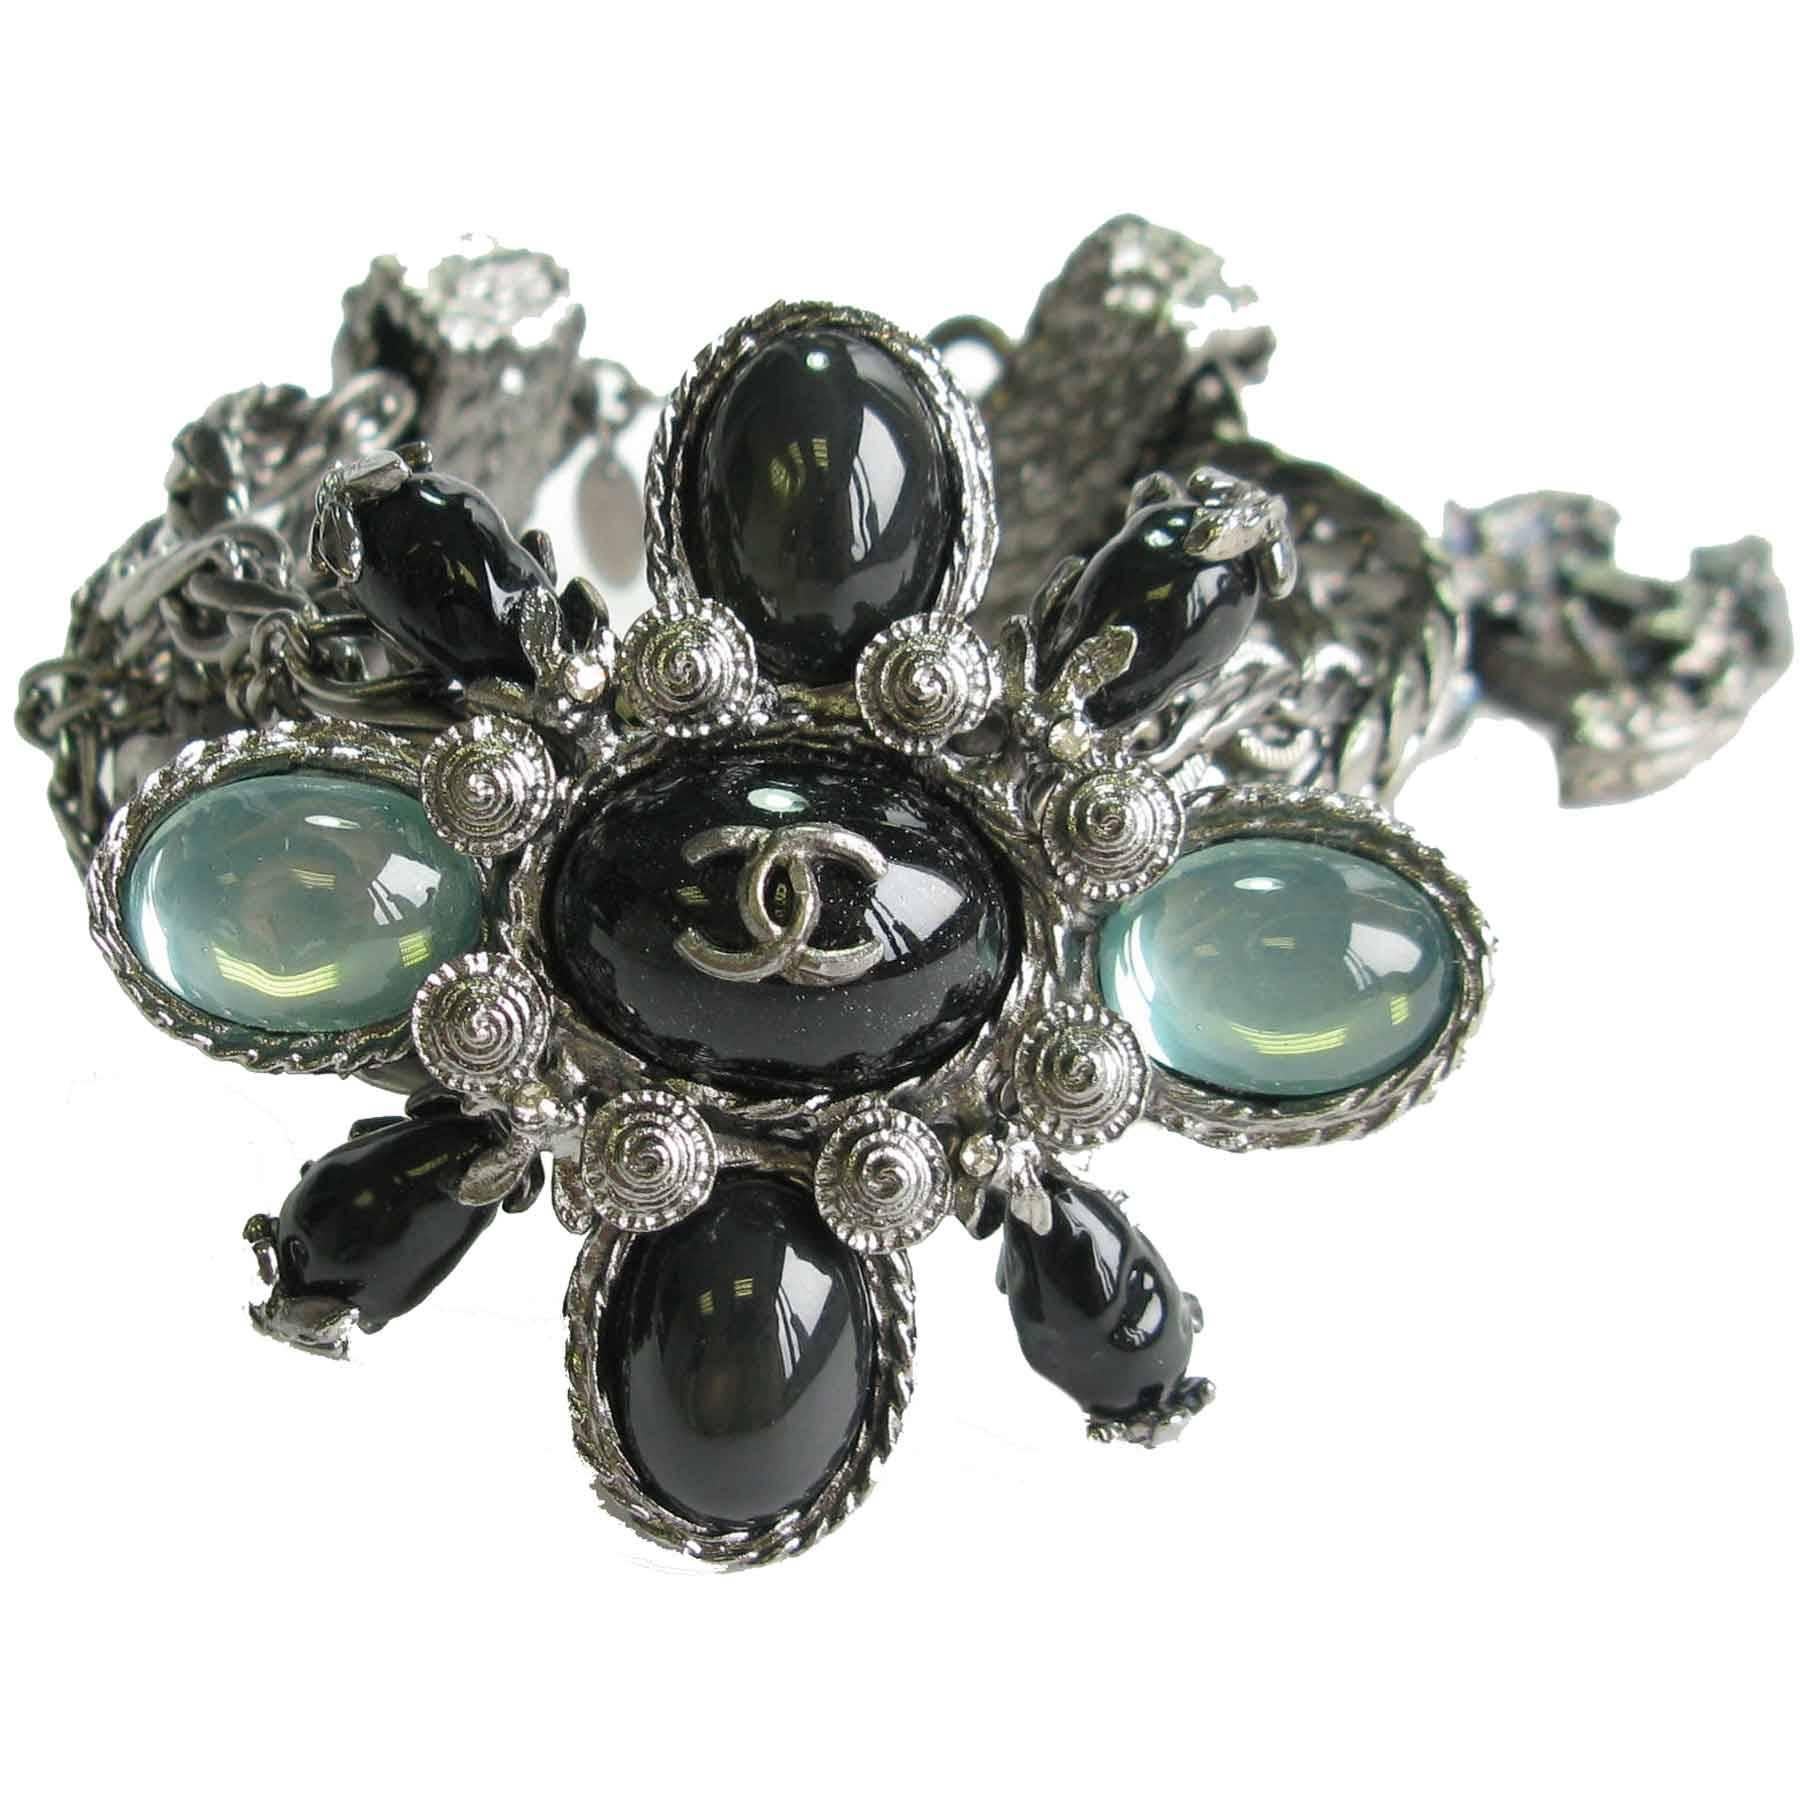 Beautiful different channels Chanel Bracelet (mesh, ring) in aged silver metal on a cross Brooch with very dark green and translucent green water resin pieces.

Never worn. Collection Circa 2010

Dimensions: Cross brooch: 6x5,5 cm, total length of